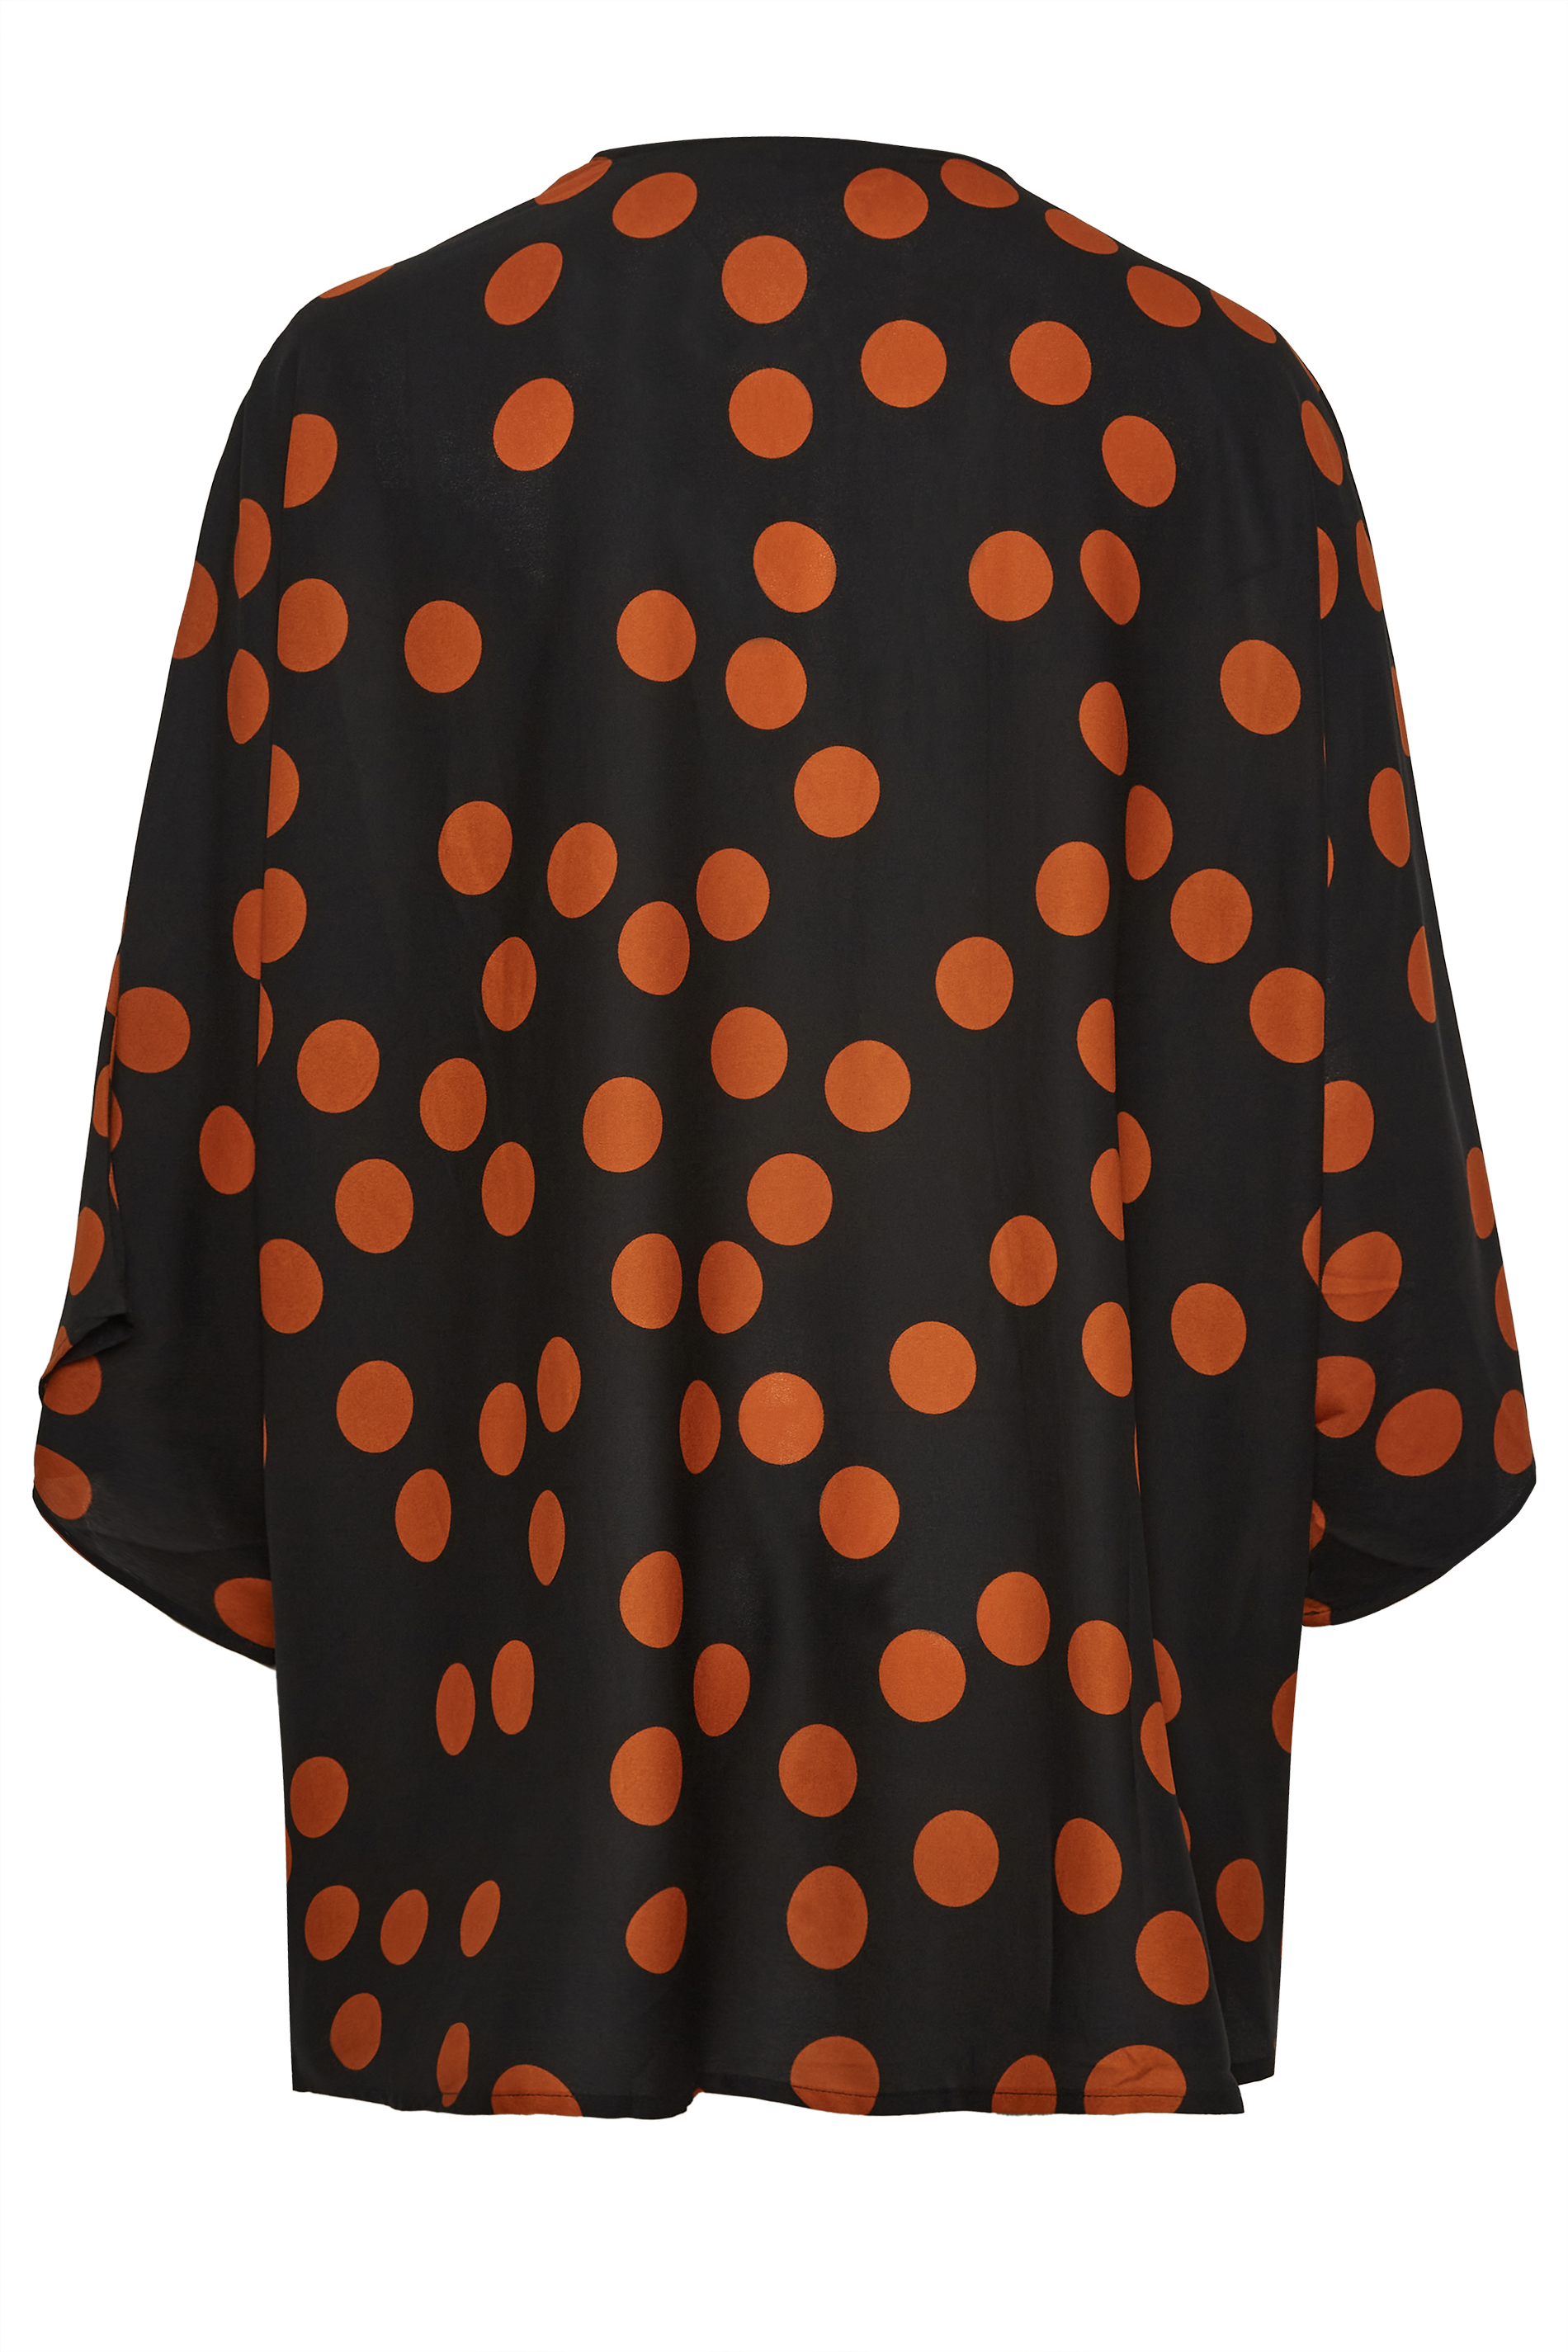 Mango Polka Dot Shirt With Brown Spots in White